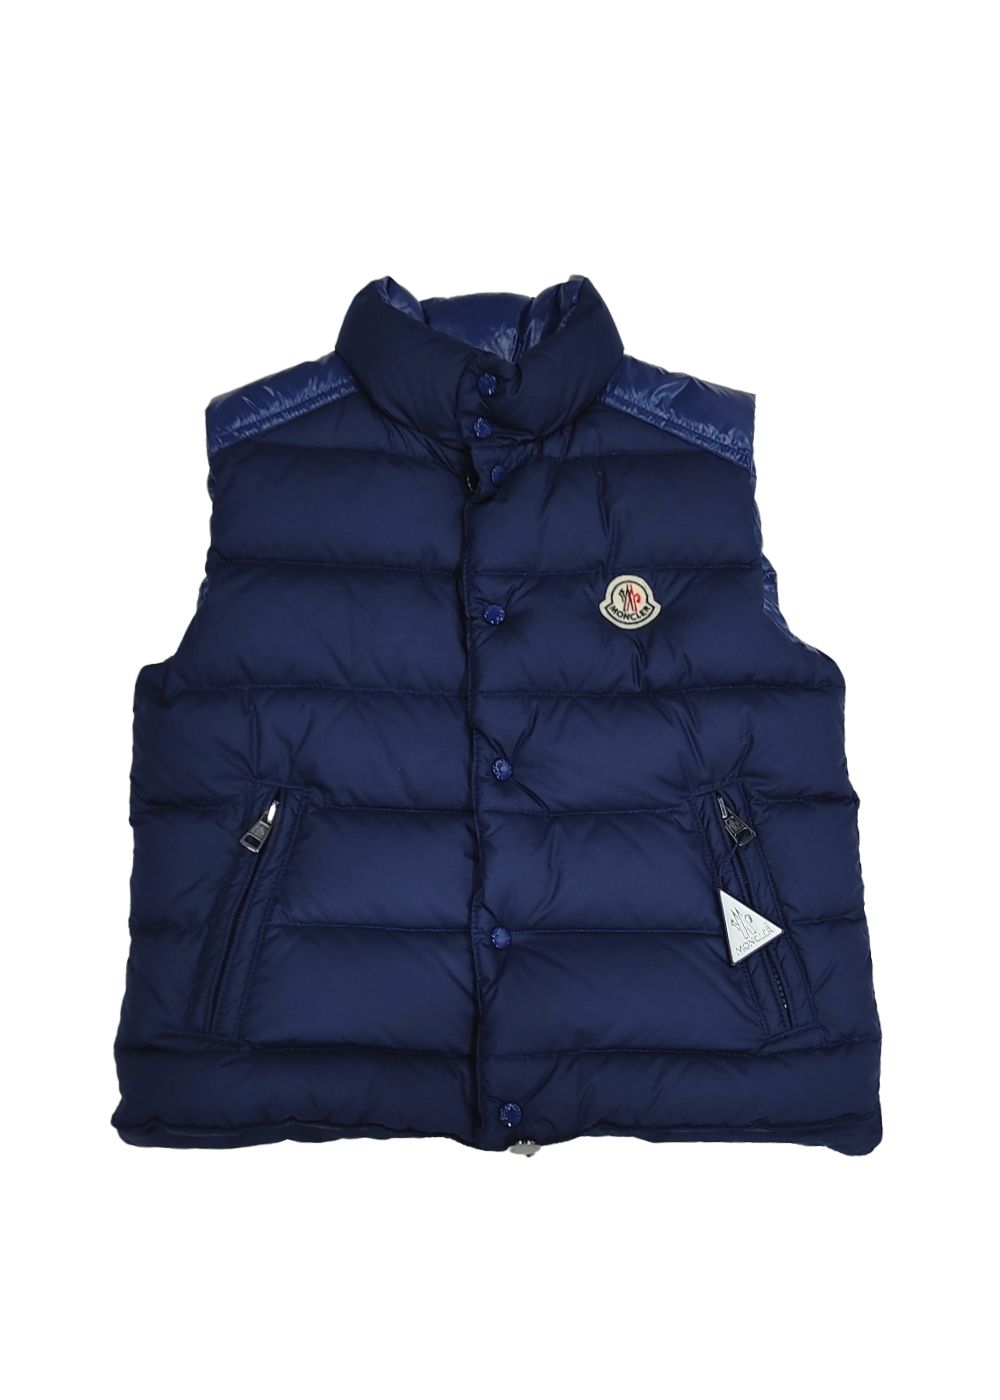 Featured image for “Moncler Gilet Blu Opaco”